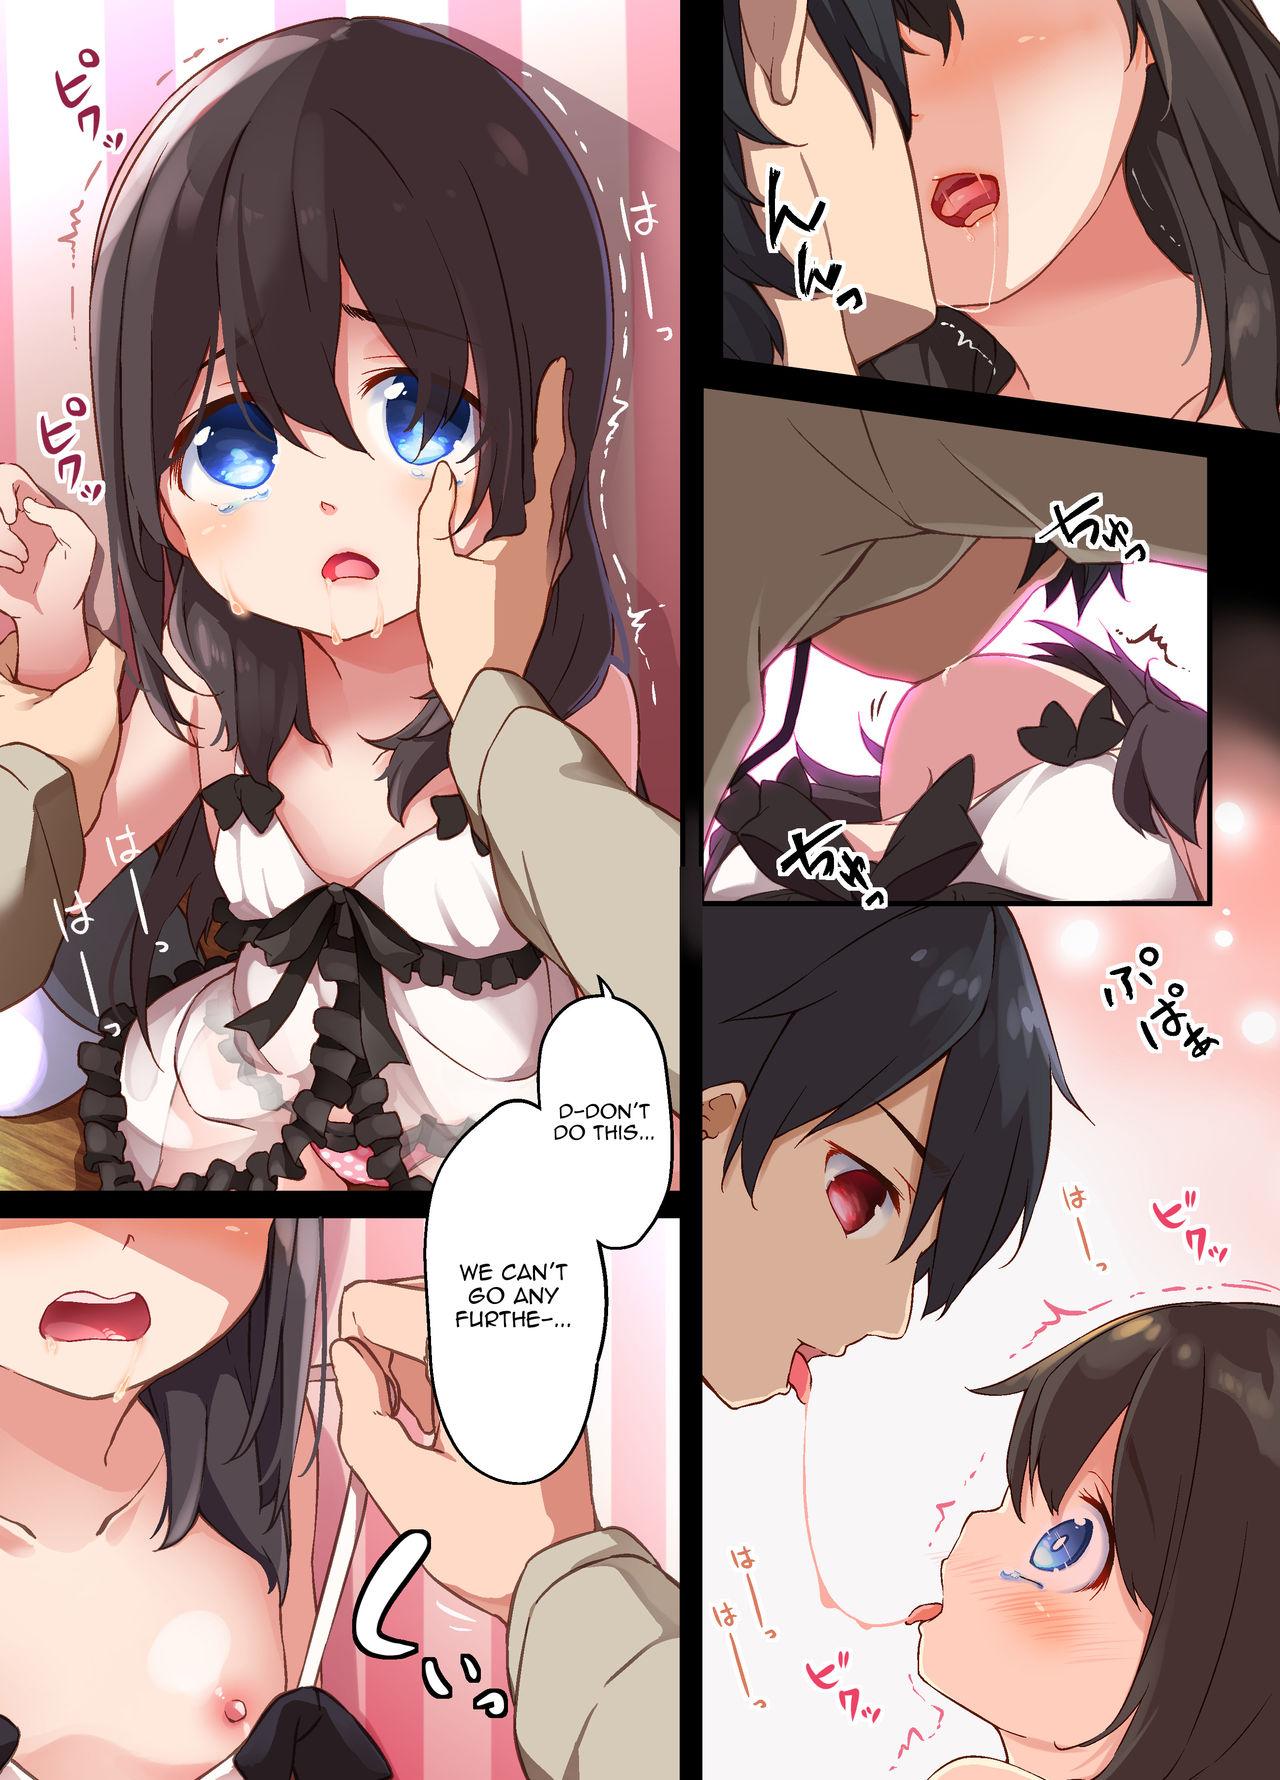 A Yandere Little Sister Wants to Be Impregnated by Her Big Brother, So She Switches Bodies With Him and They Have Baby-Making Sex 13